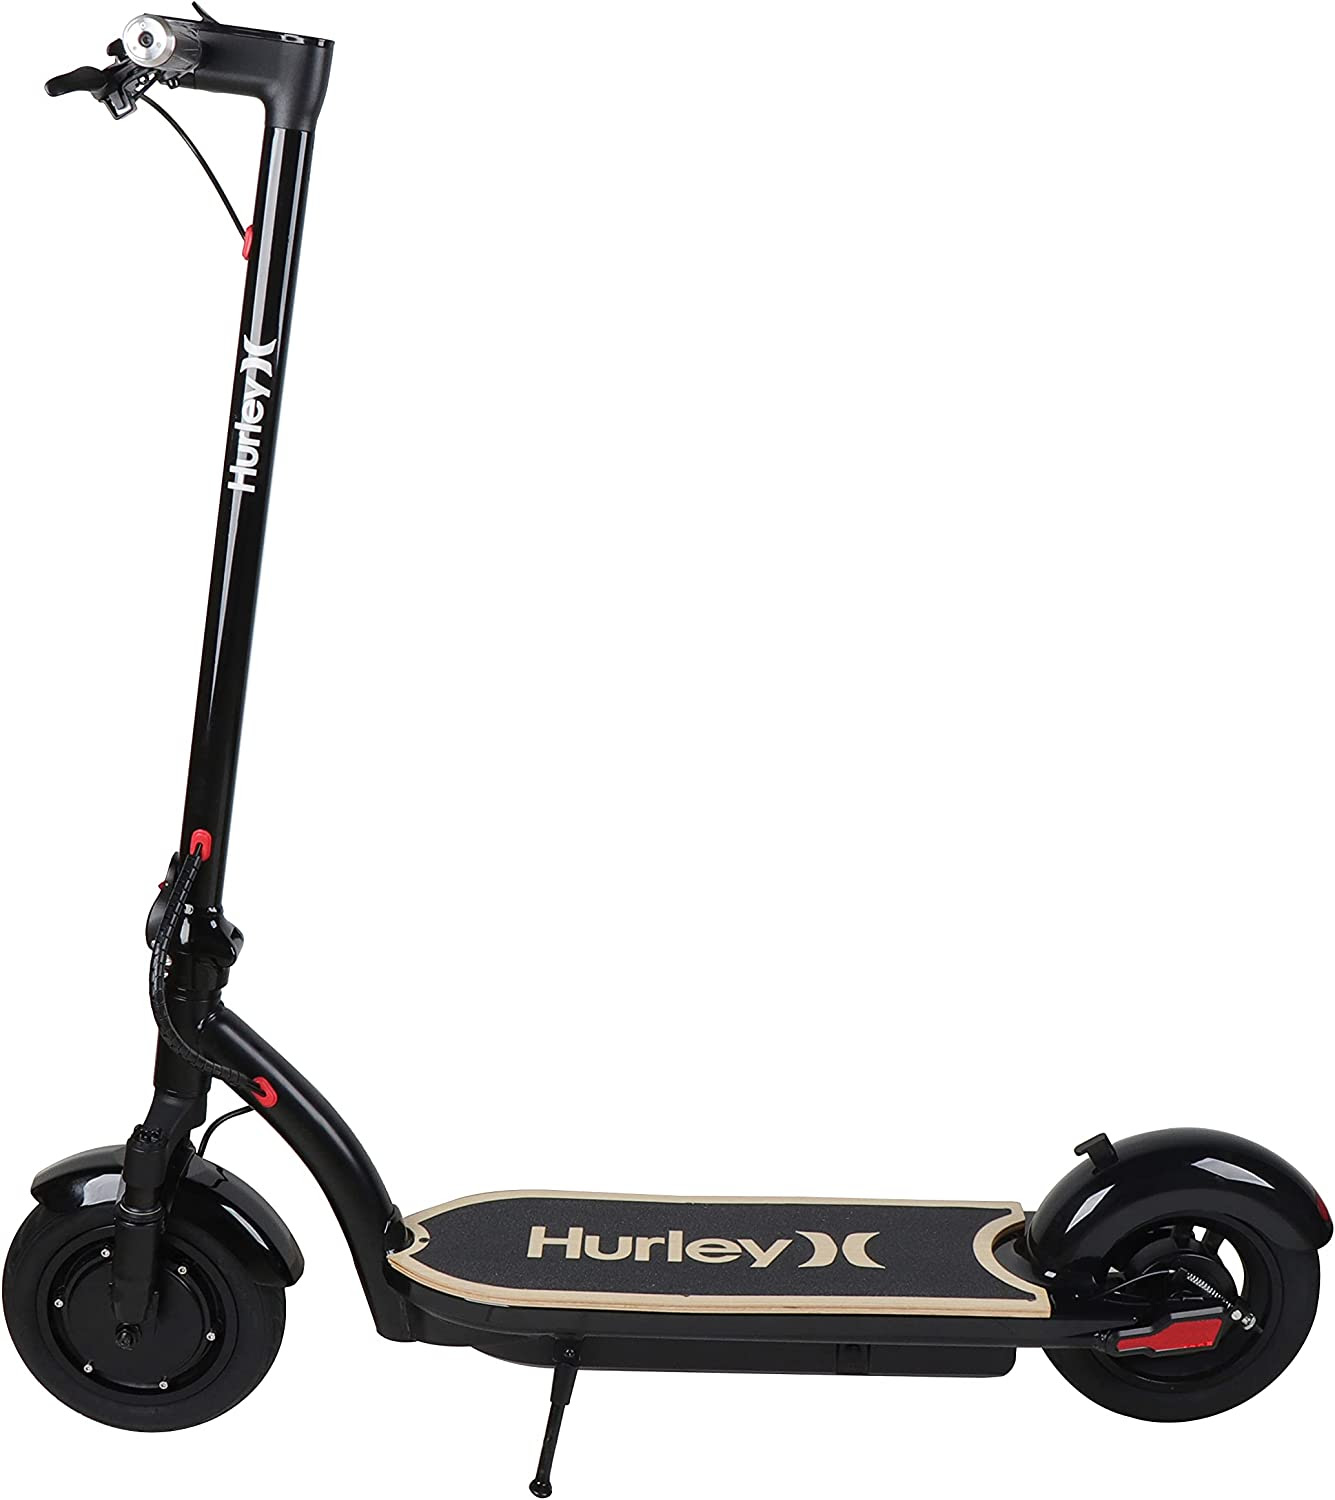 Hurley Juice Electric Scooter. 1800 units. EXW Los Angeles $235.00 unit.